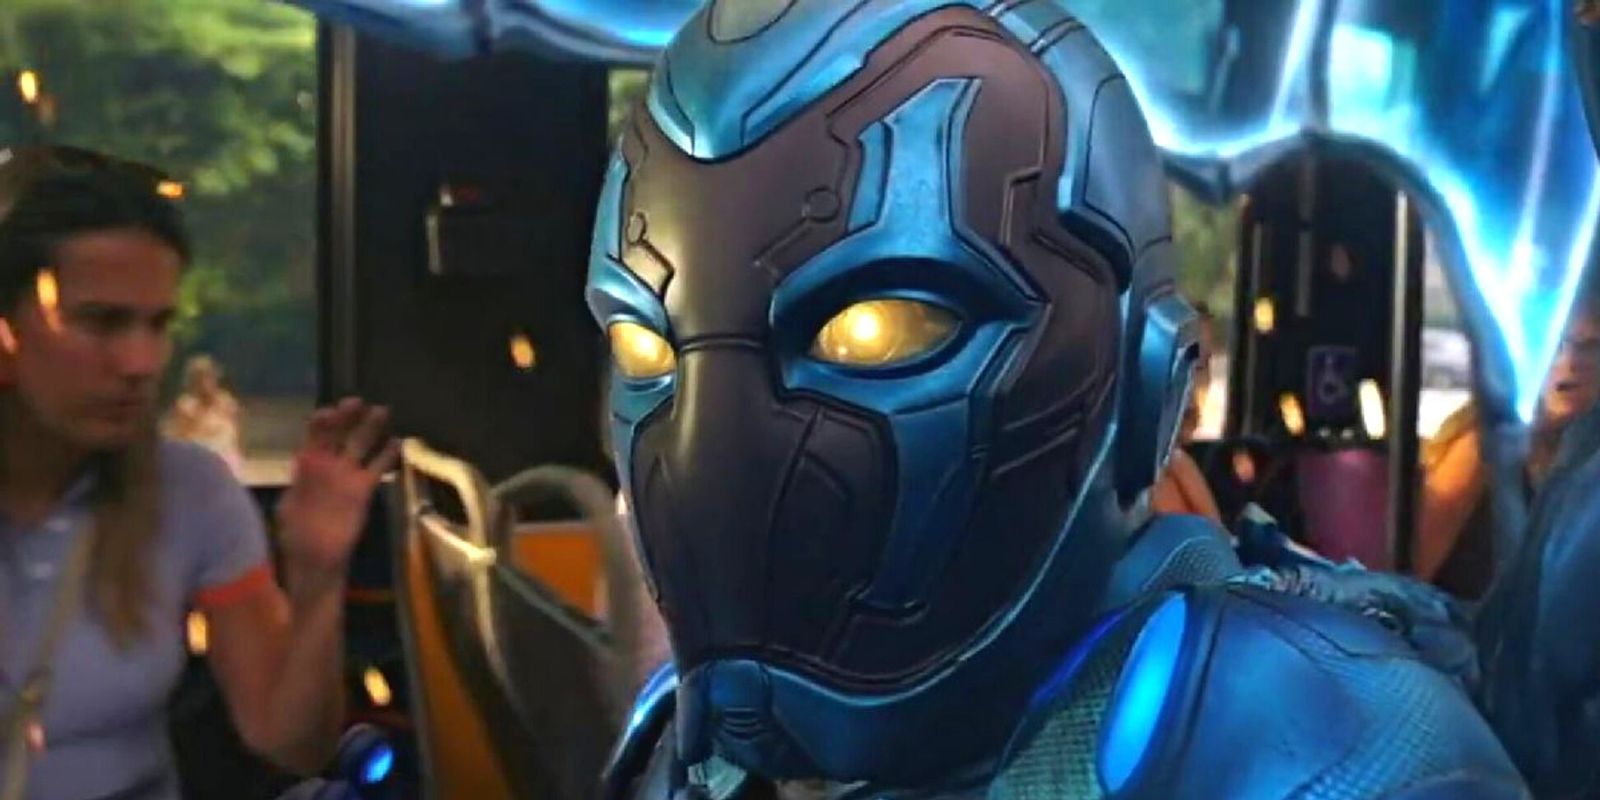 DC's Blue Beetle Is Officially 'Fresh' on Rotten Tomatoes